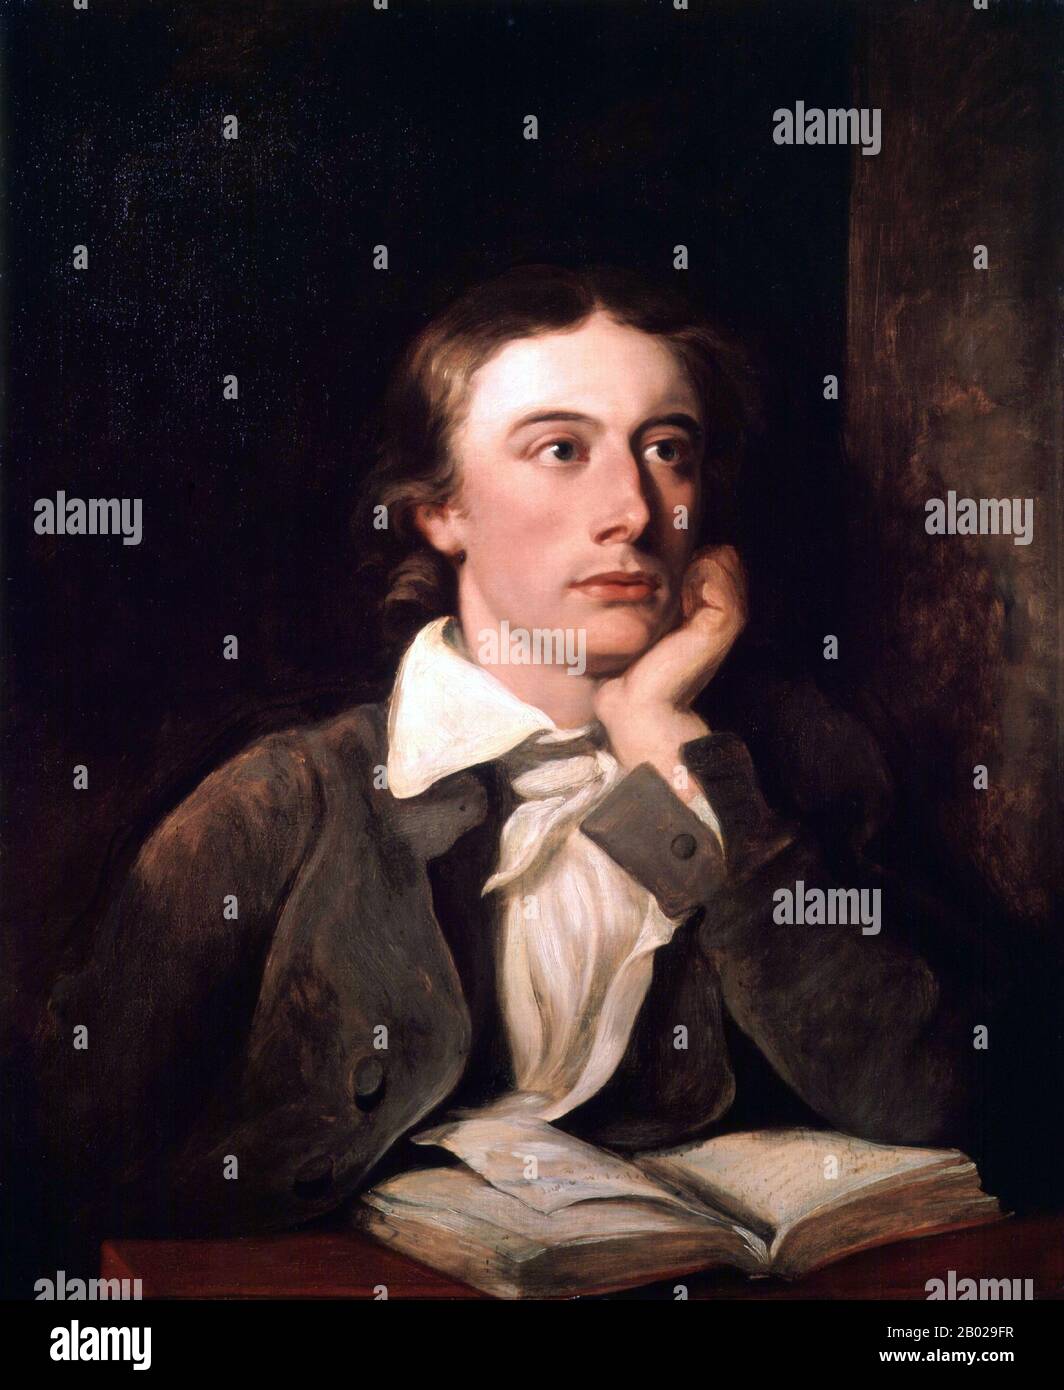 John Keats (31 October 1795 – 23 February 1821) was an English Romantic poet. He was one of the main figures of the second generation of Romantic poets along with Lord Byron and Percy Bysshe Shelley, despite his work only having been in publication for four years before his death.  Although his poems were not generally well received by critics during his life, his reputation grew after his death, so that by the end of the 19th century he had become one of the most beloved of all English poets. He had a significant influence on a diverse range of poets and writers. Jorge Luis Borges stated that Stock Photo